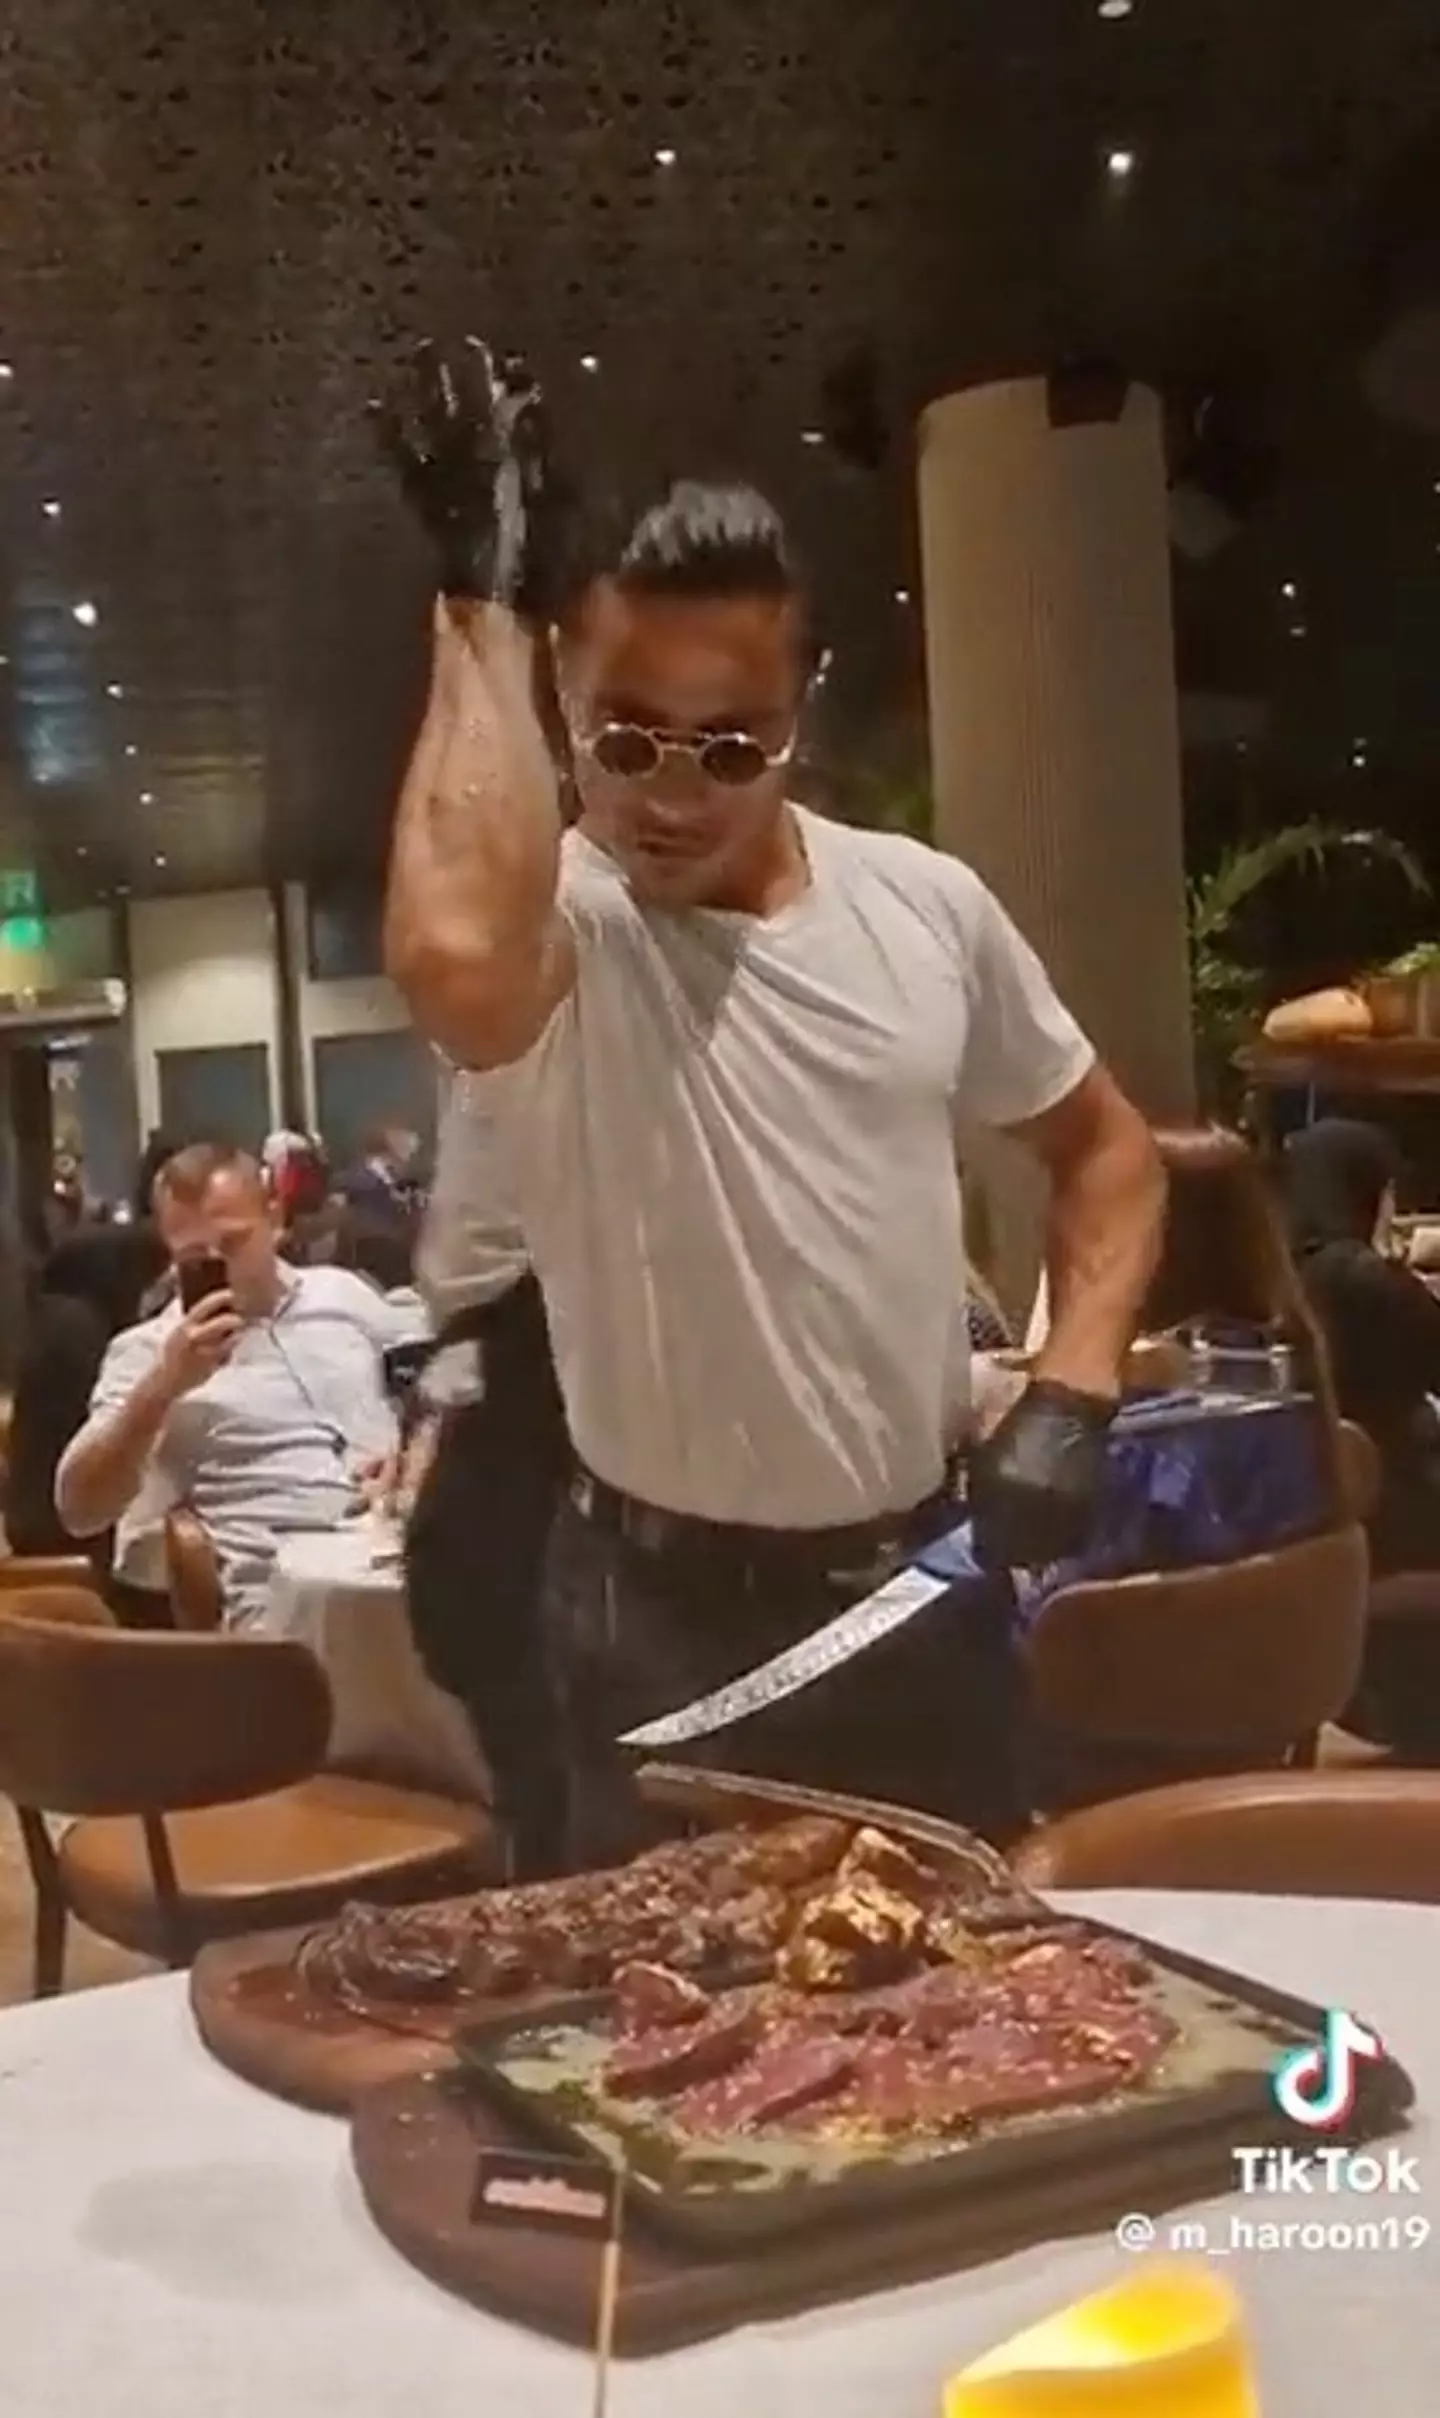 Salt Bae's unique salt-sprinkling technique viral in 2017 and has helped him amass a reported net worth of $80 million.